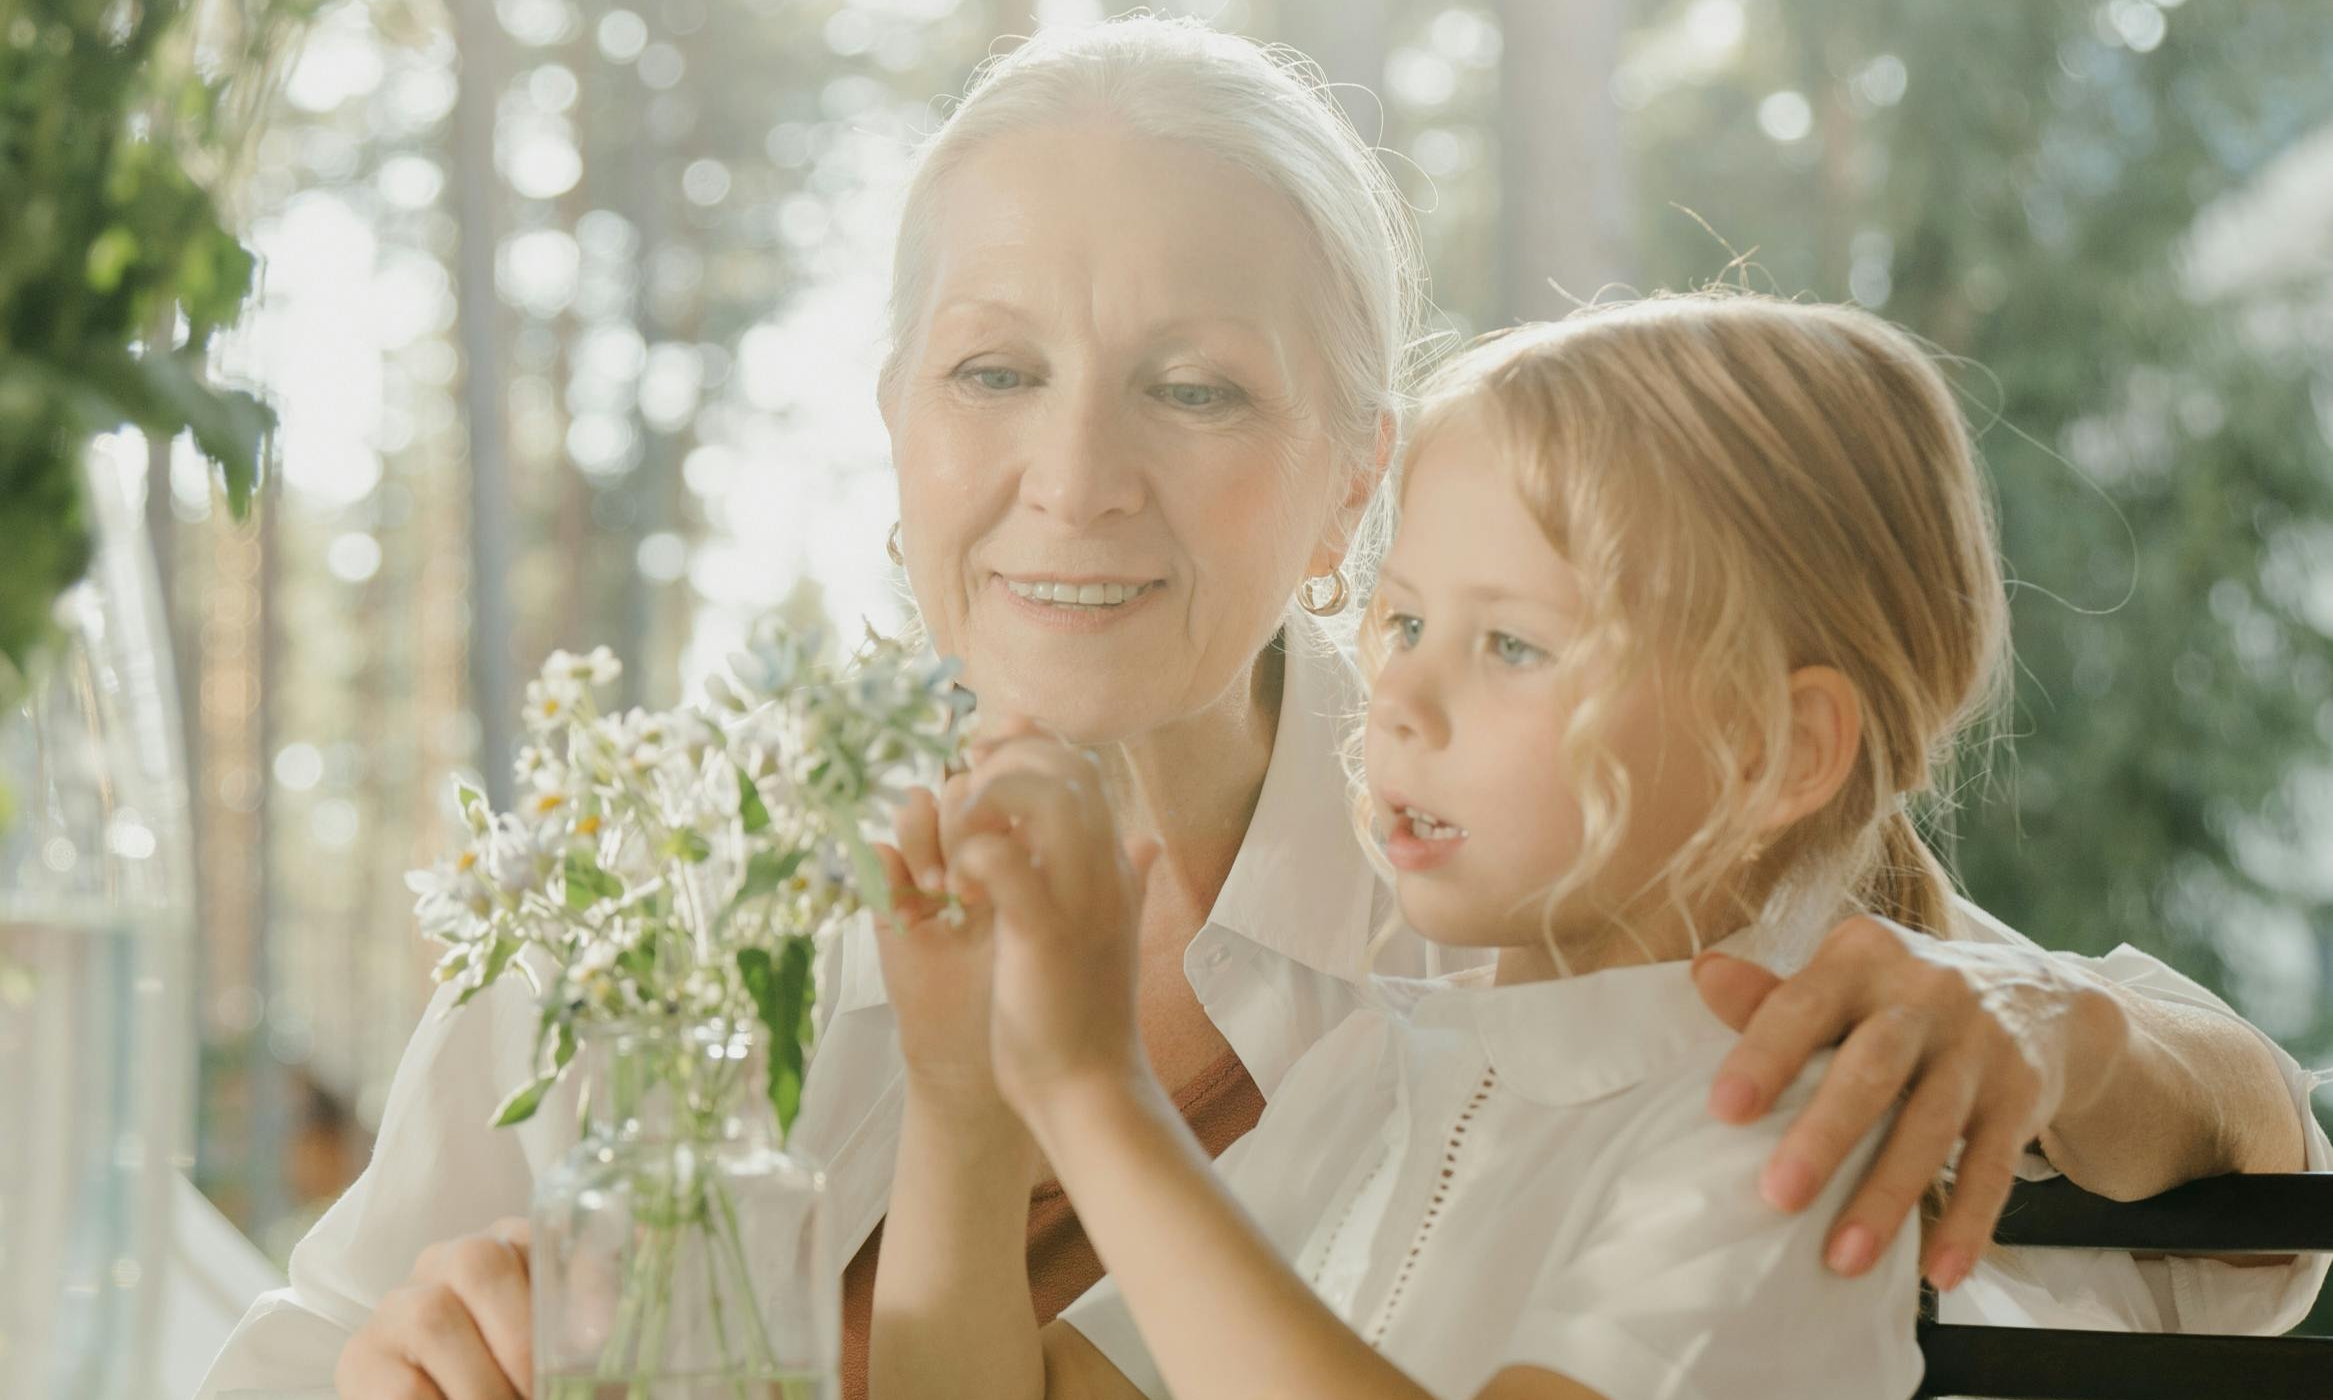 An elderly woman and child arrange flowers together | Source: Pexels